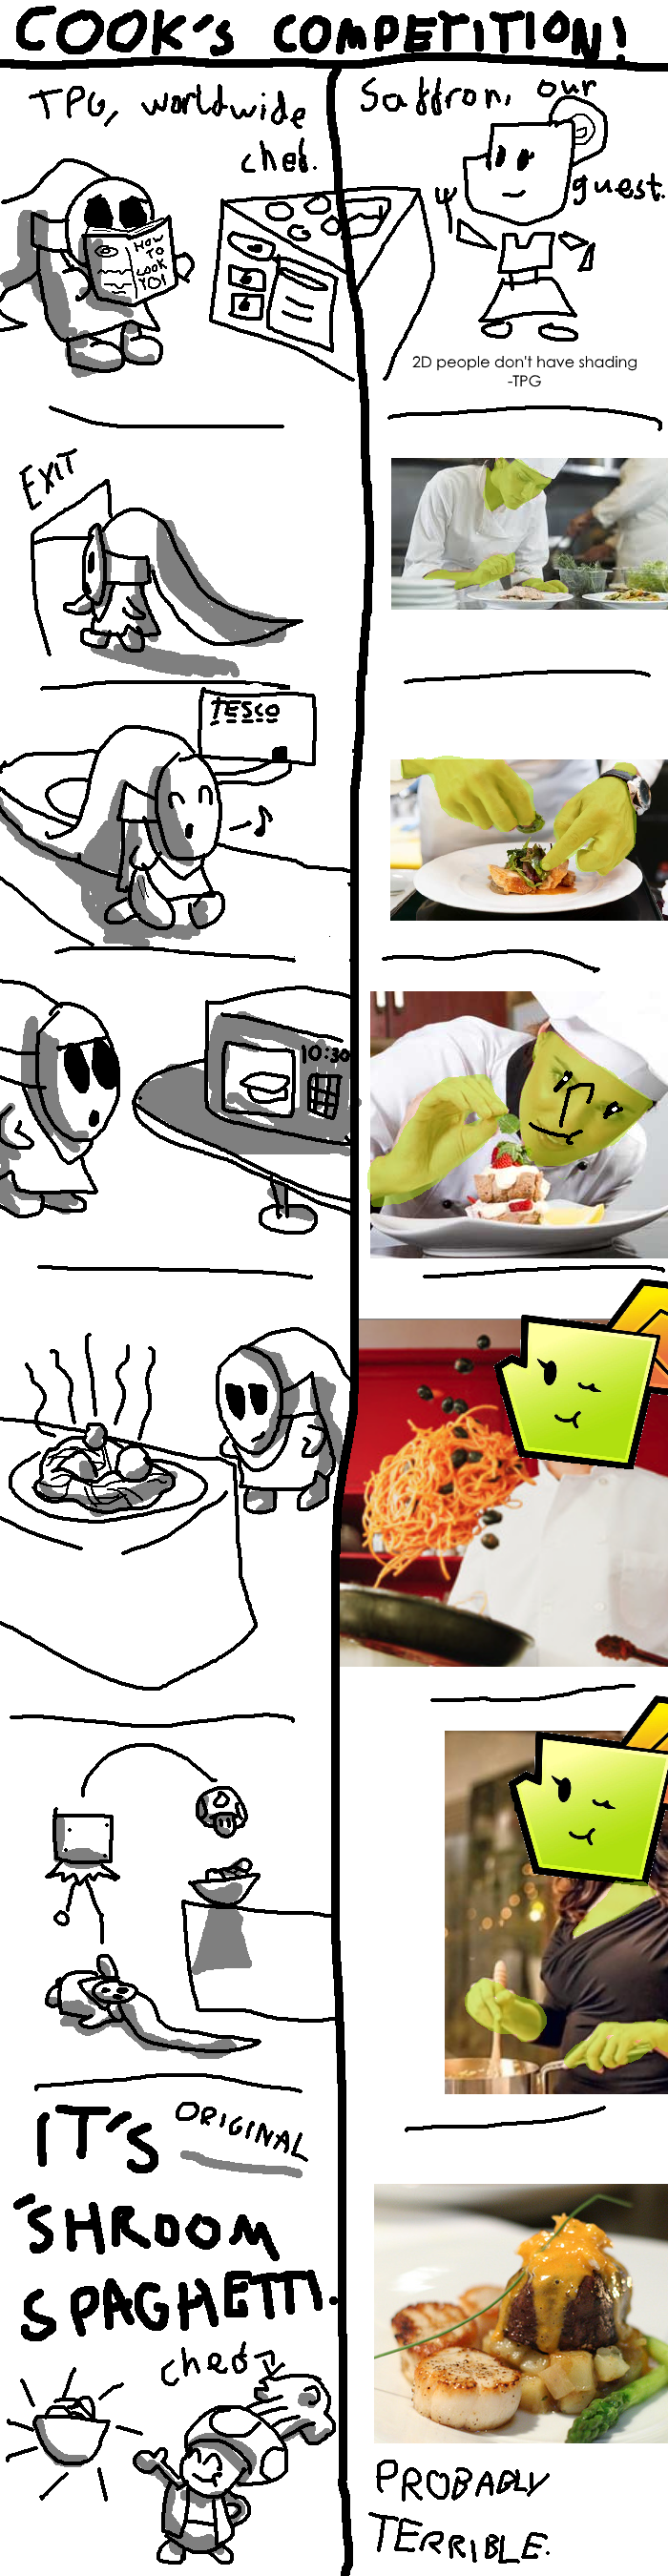 CookingGuideAug16.png